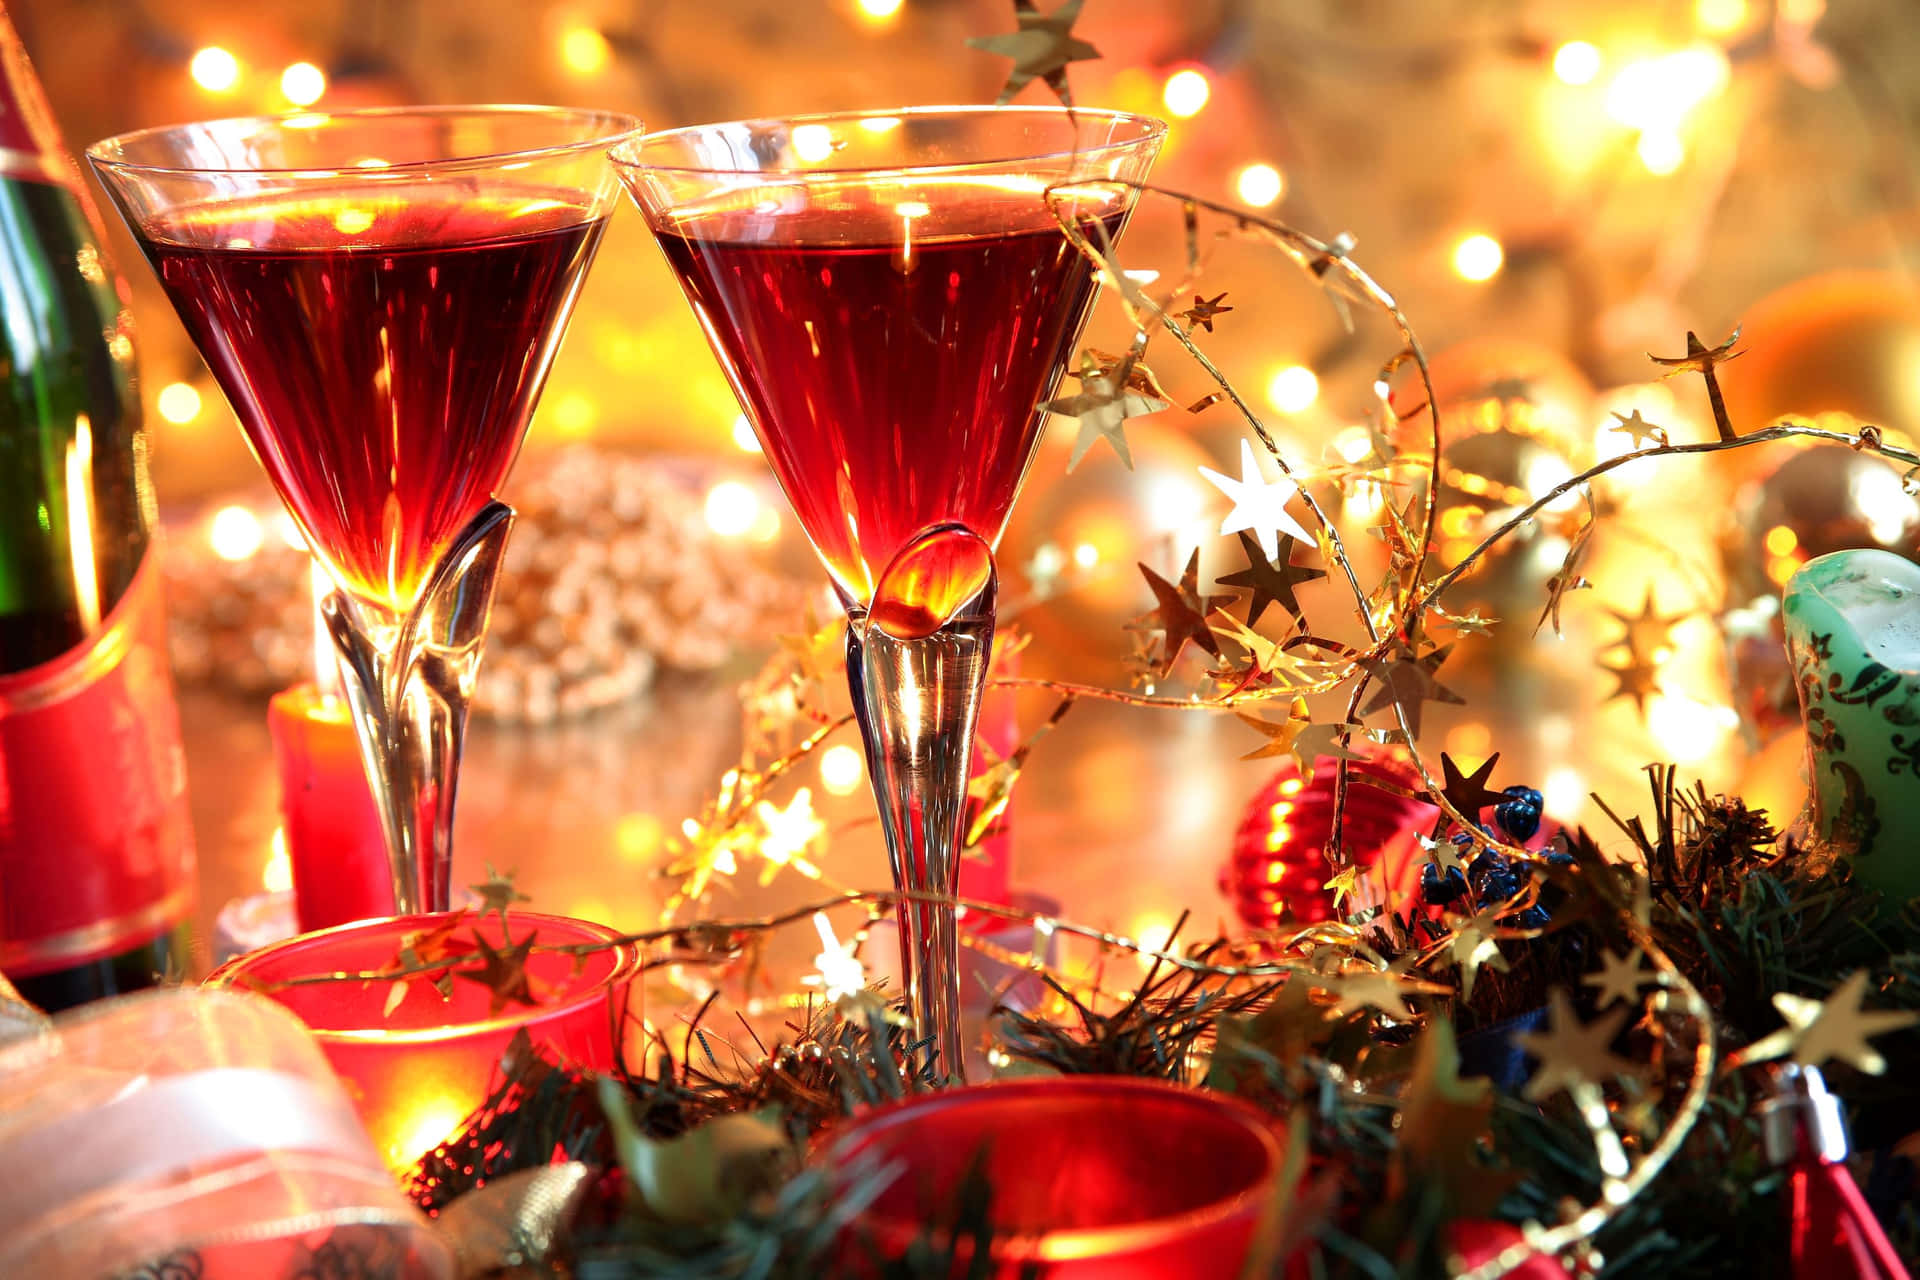 The perfect holiday season celebration with friends and family.